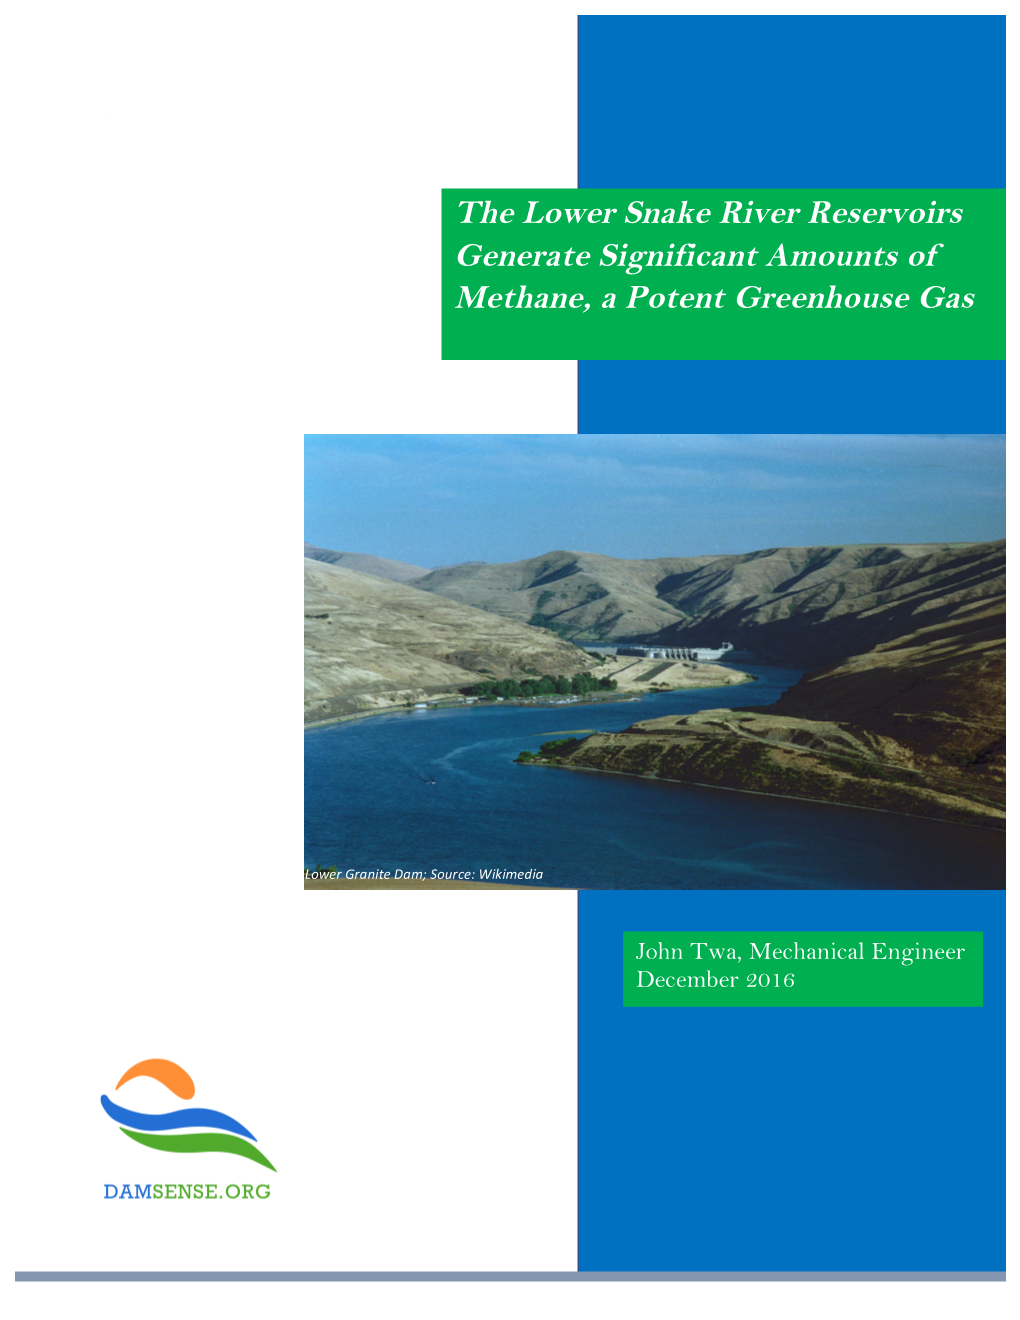 The Lower Snake River Reservoirs Generate Significant Amounts of Methane, a Potent Greenhouse Gas